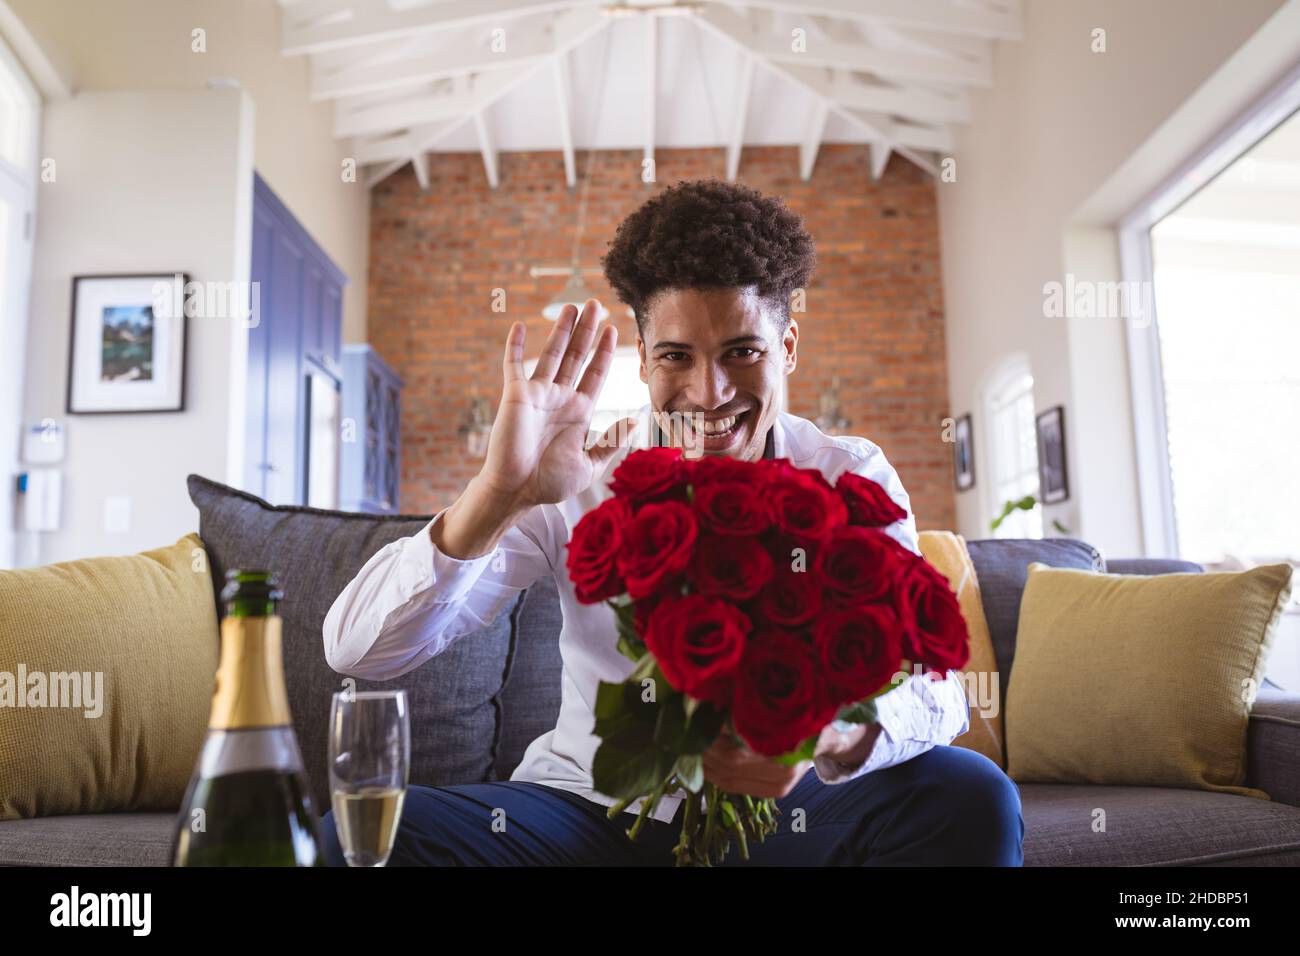 Portrait of happy young man holding rose bouquet waving during virtual date from living room at home Stock Photo